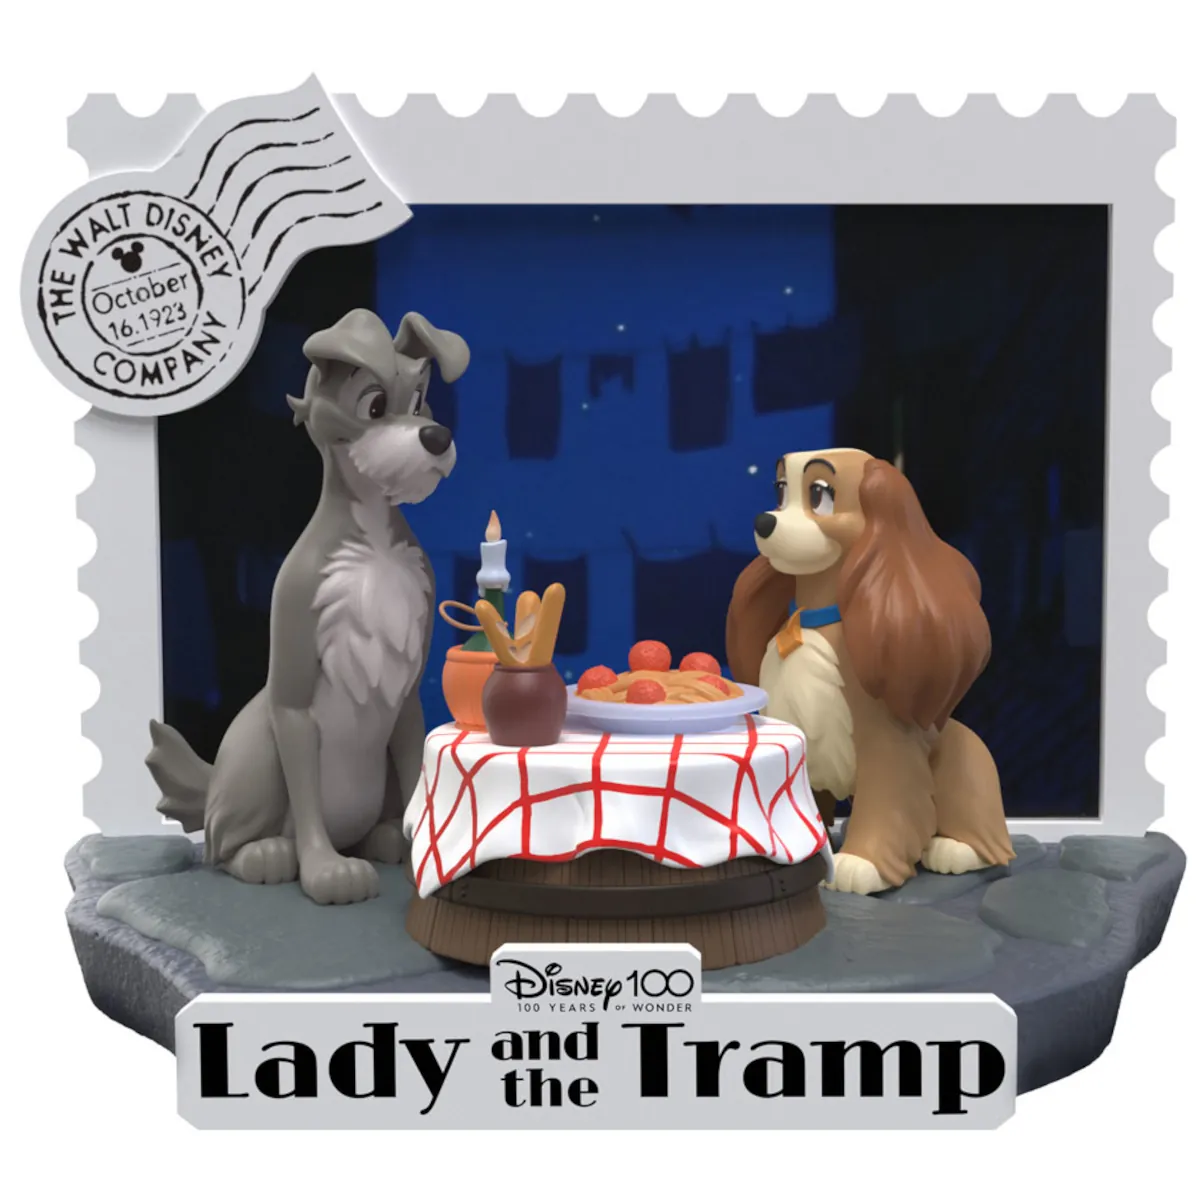 DS-136 Disney 100 Years of Wonder D-Stage 12cm Lady And The Tramp PVC Diorama